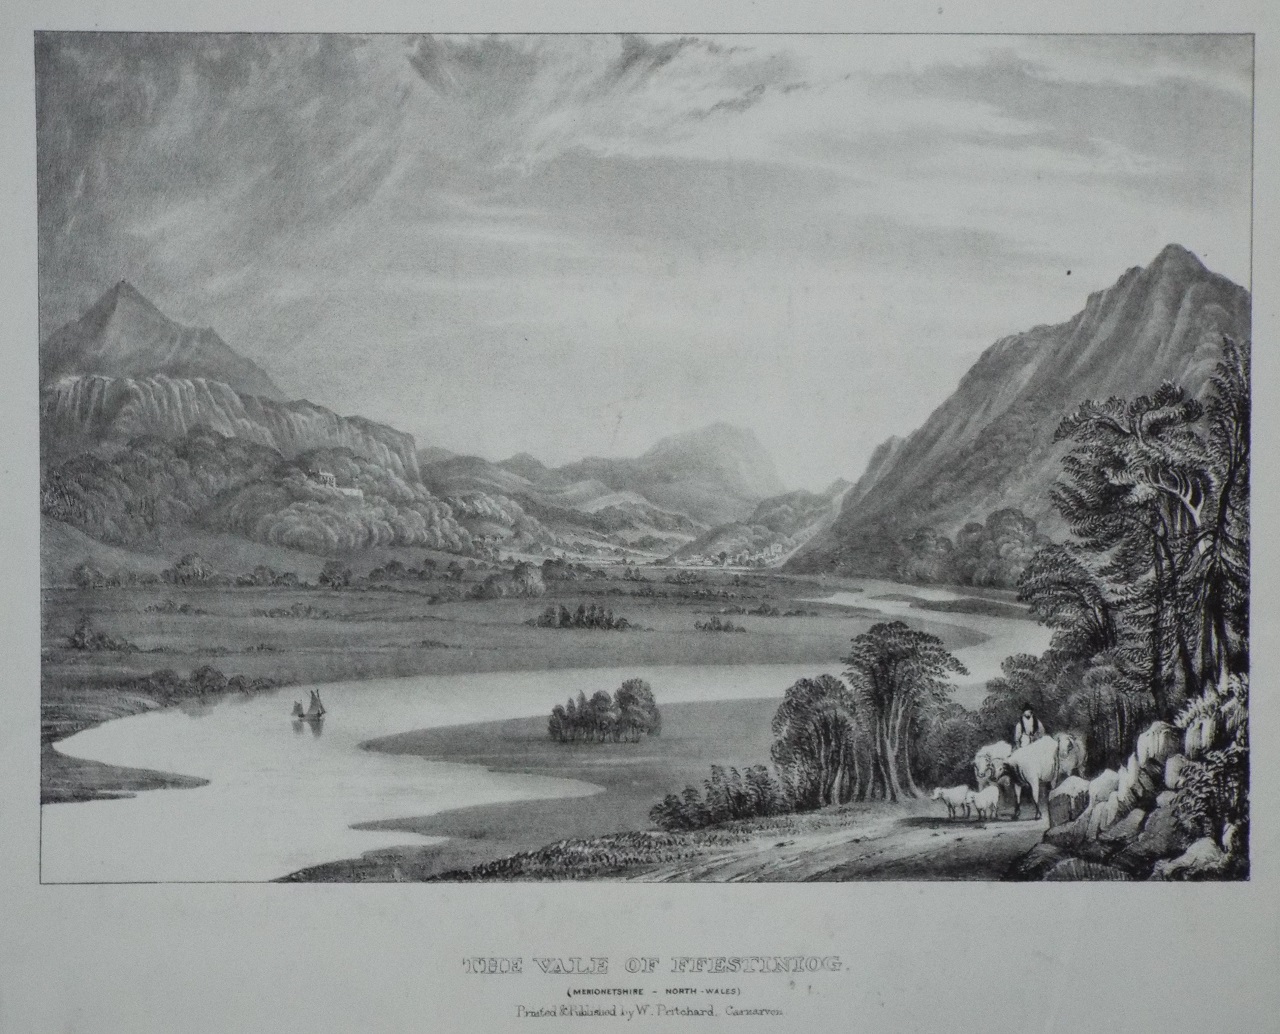 Lithograph - The Vale of Festiniog. (Merionethshire - North Wales)